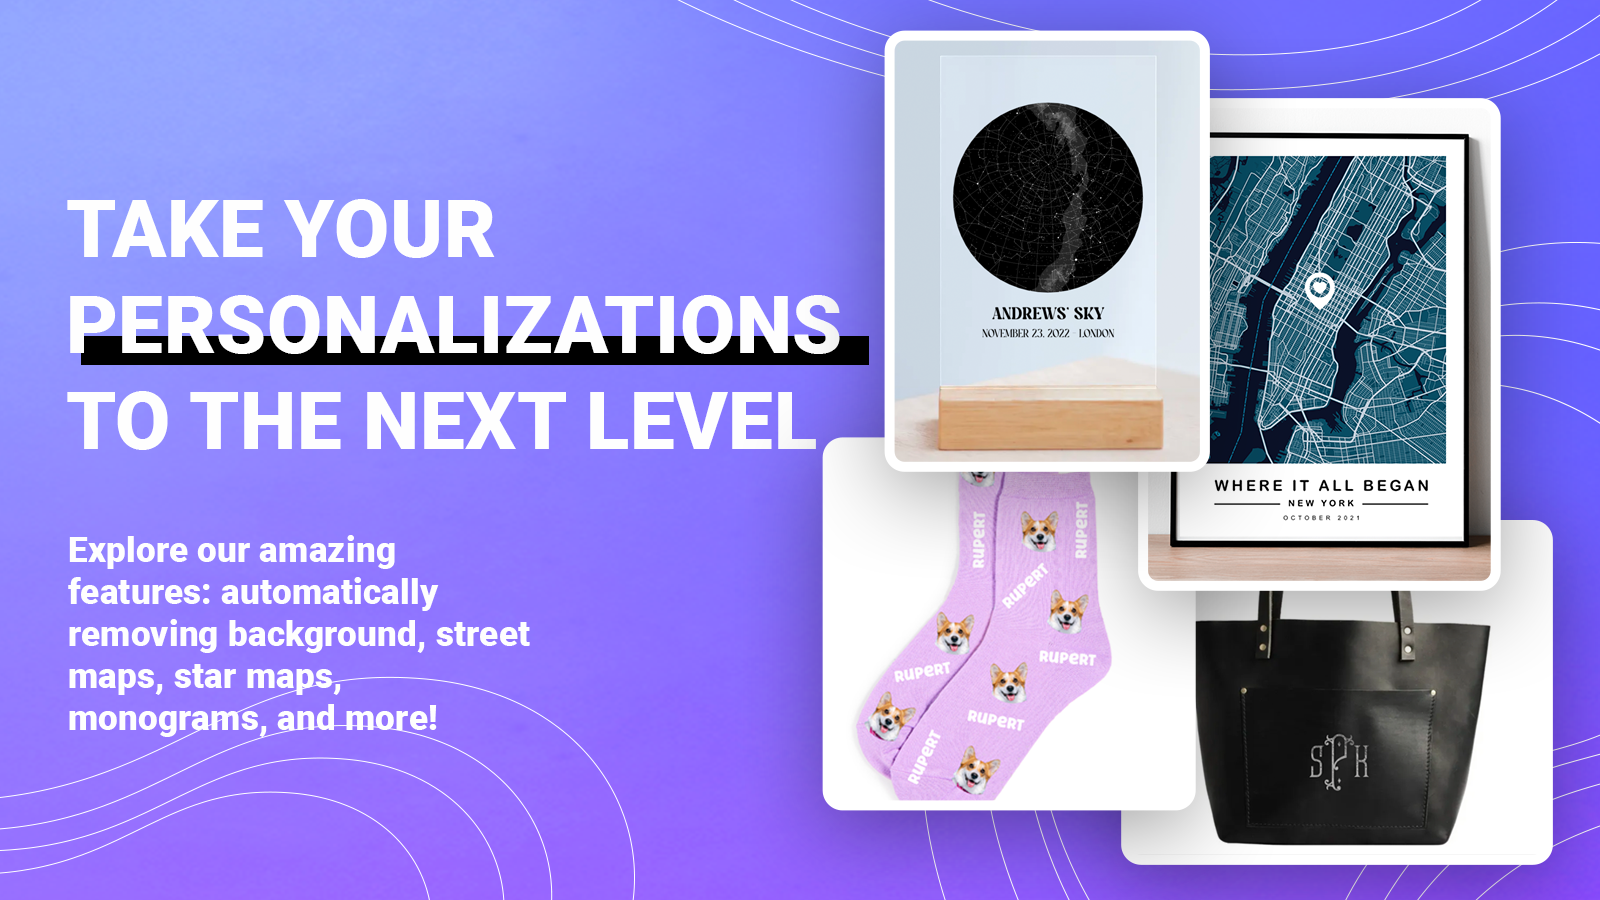 Take your personalization to the next level